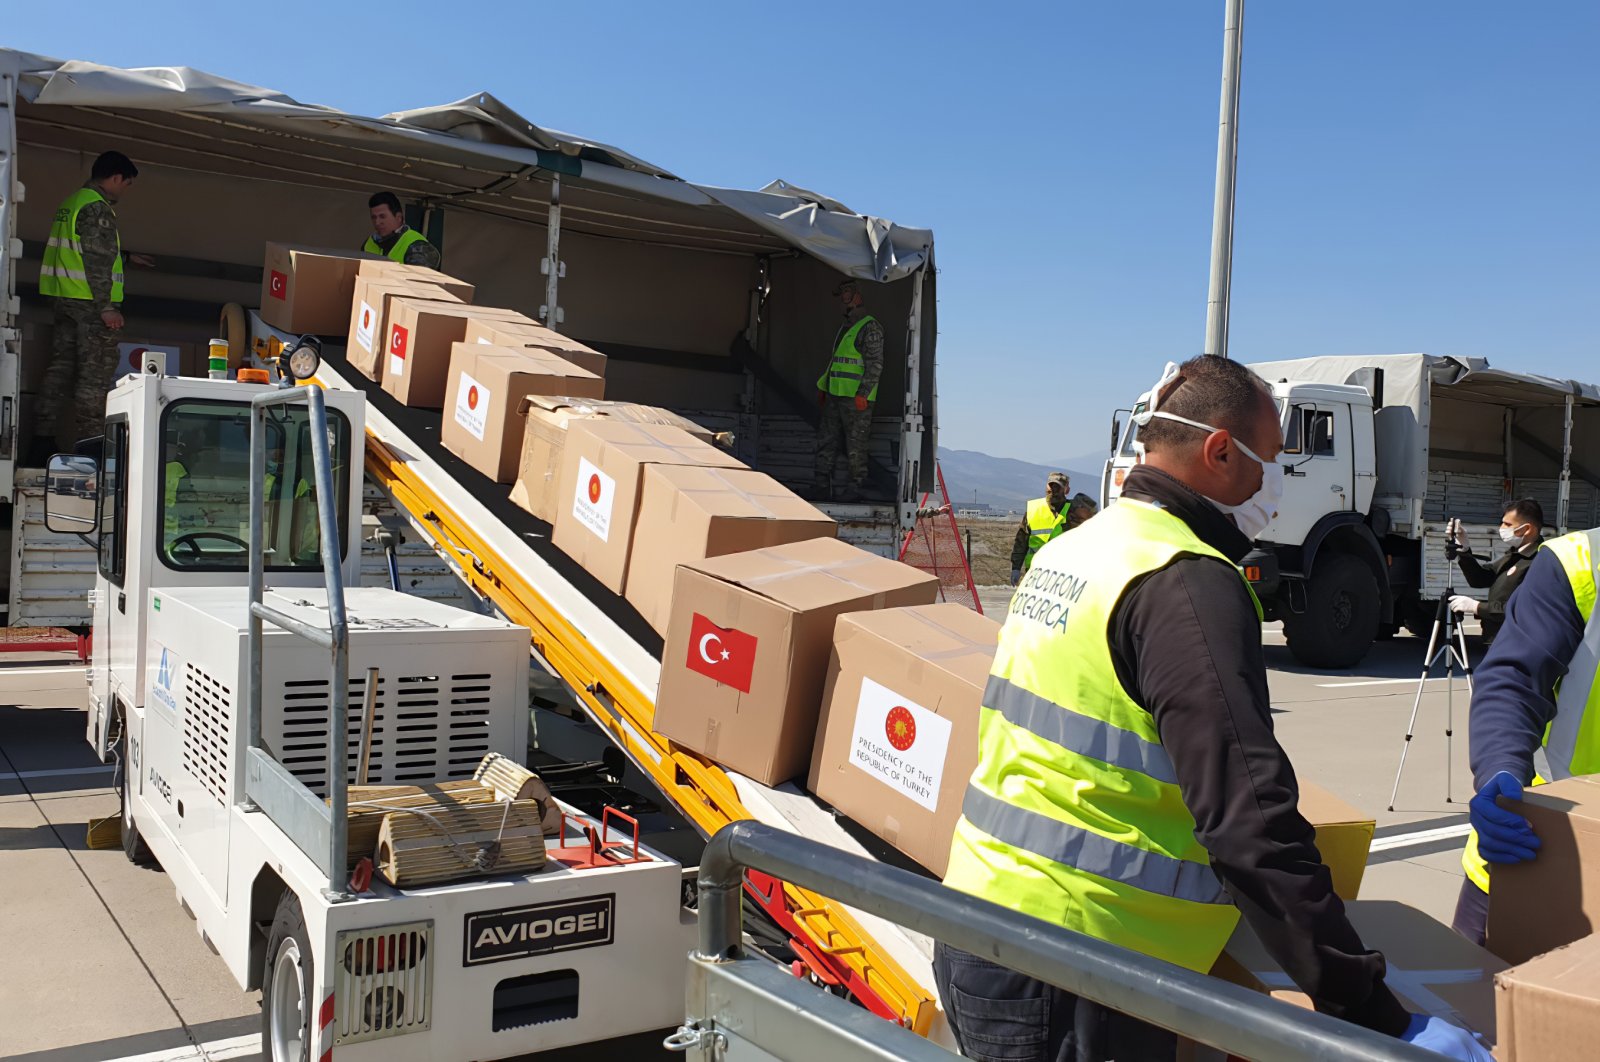 Serbian officials unload Personal Protection Equipment donated by Turkey to help the country combat the new coronavirus outbreak, in Belgrade, Serbia, Wednesday, April 8, 2020. (AP Photo)